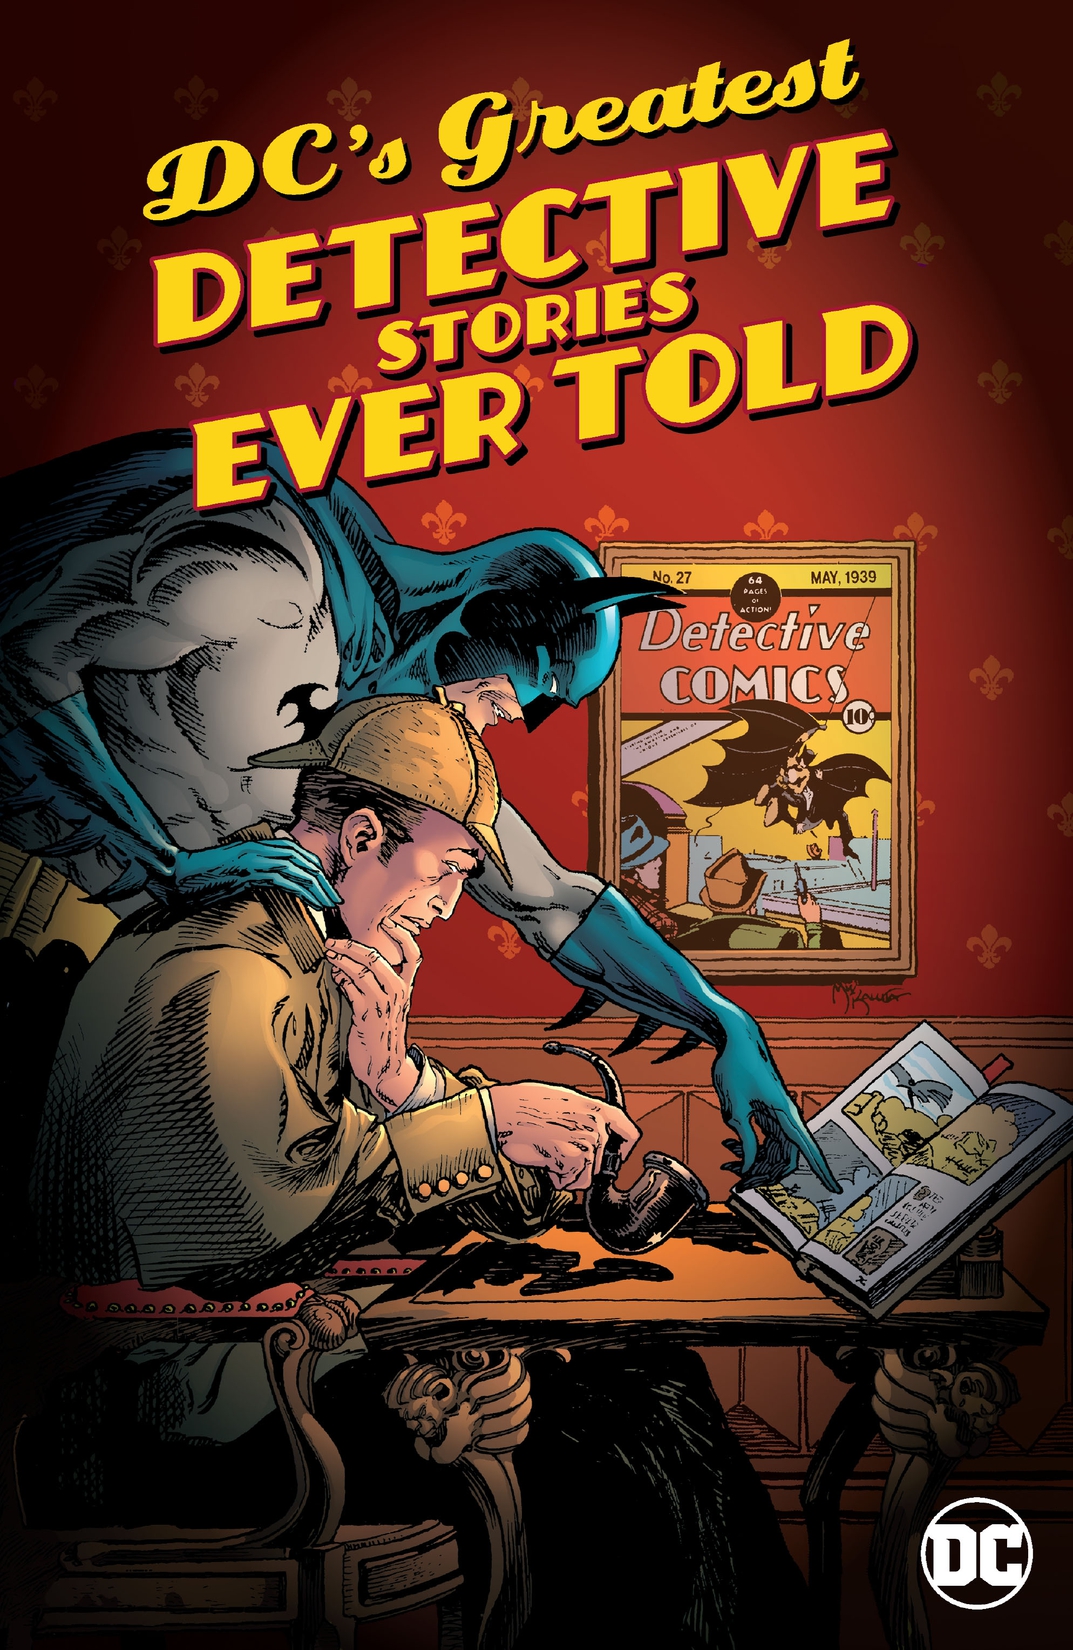 DC's Greatest Detective Stories Ever Told preview images